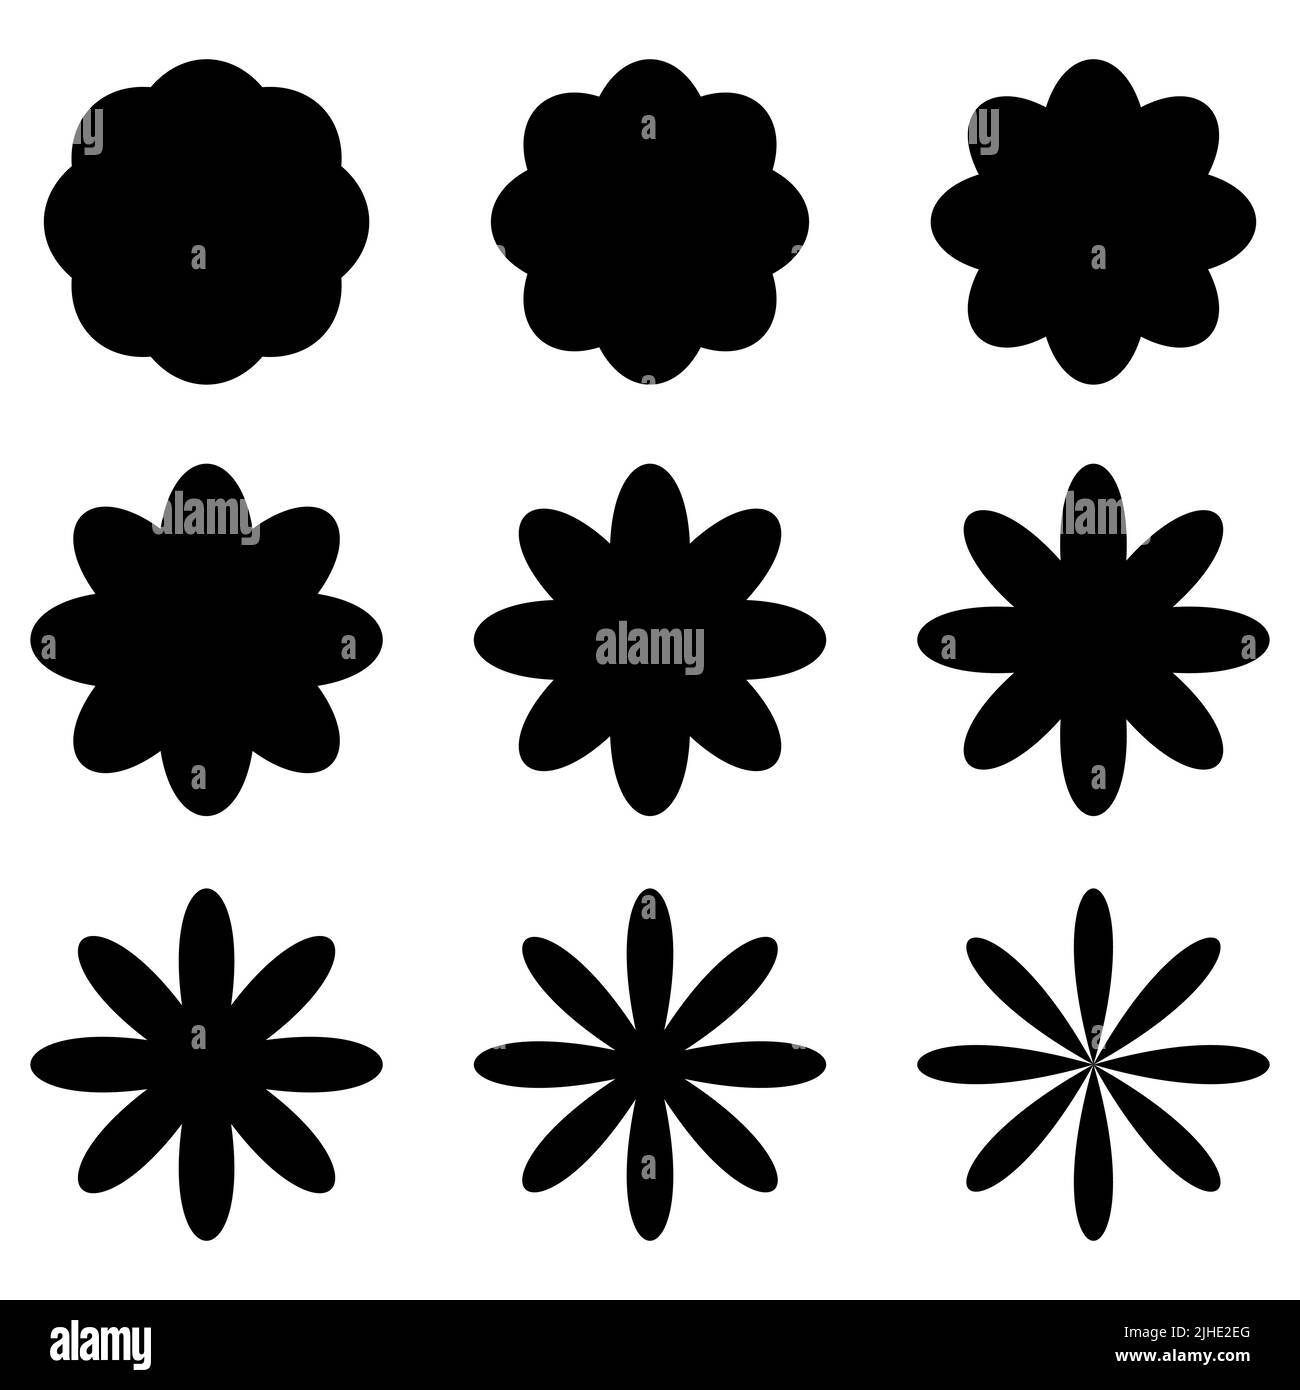 Flowers icons set isolated on white background. Vector illustration Stock Vector